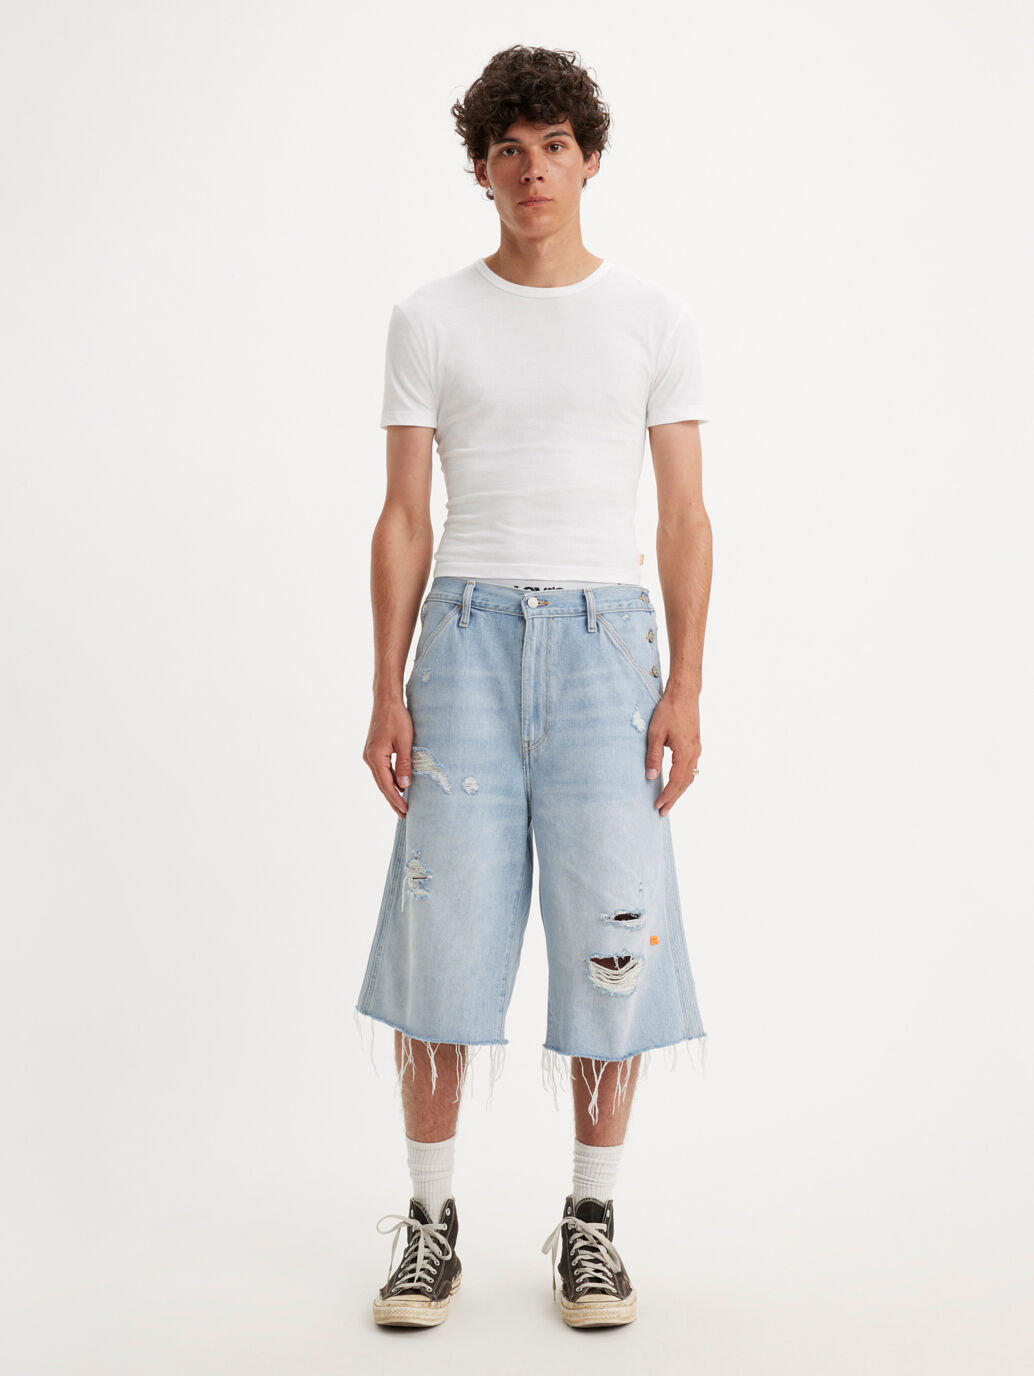 Levi's® x ERL Men's Overall Shorts